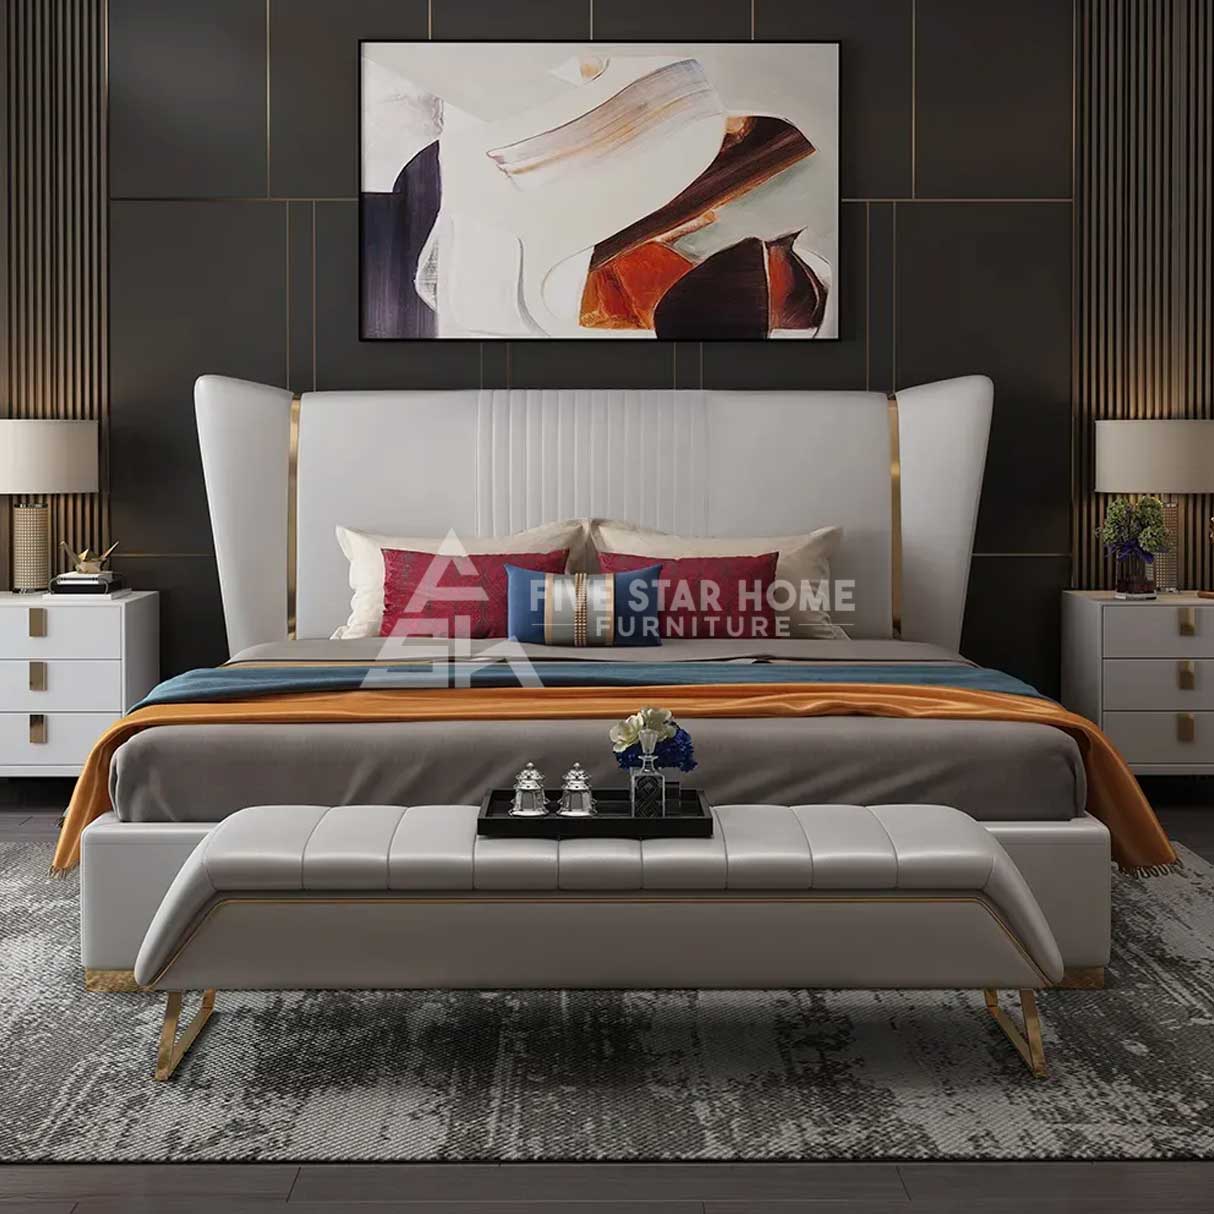 Stylish Wingback Headboard Faux Leather Upholstered Bed